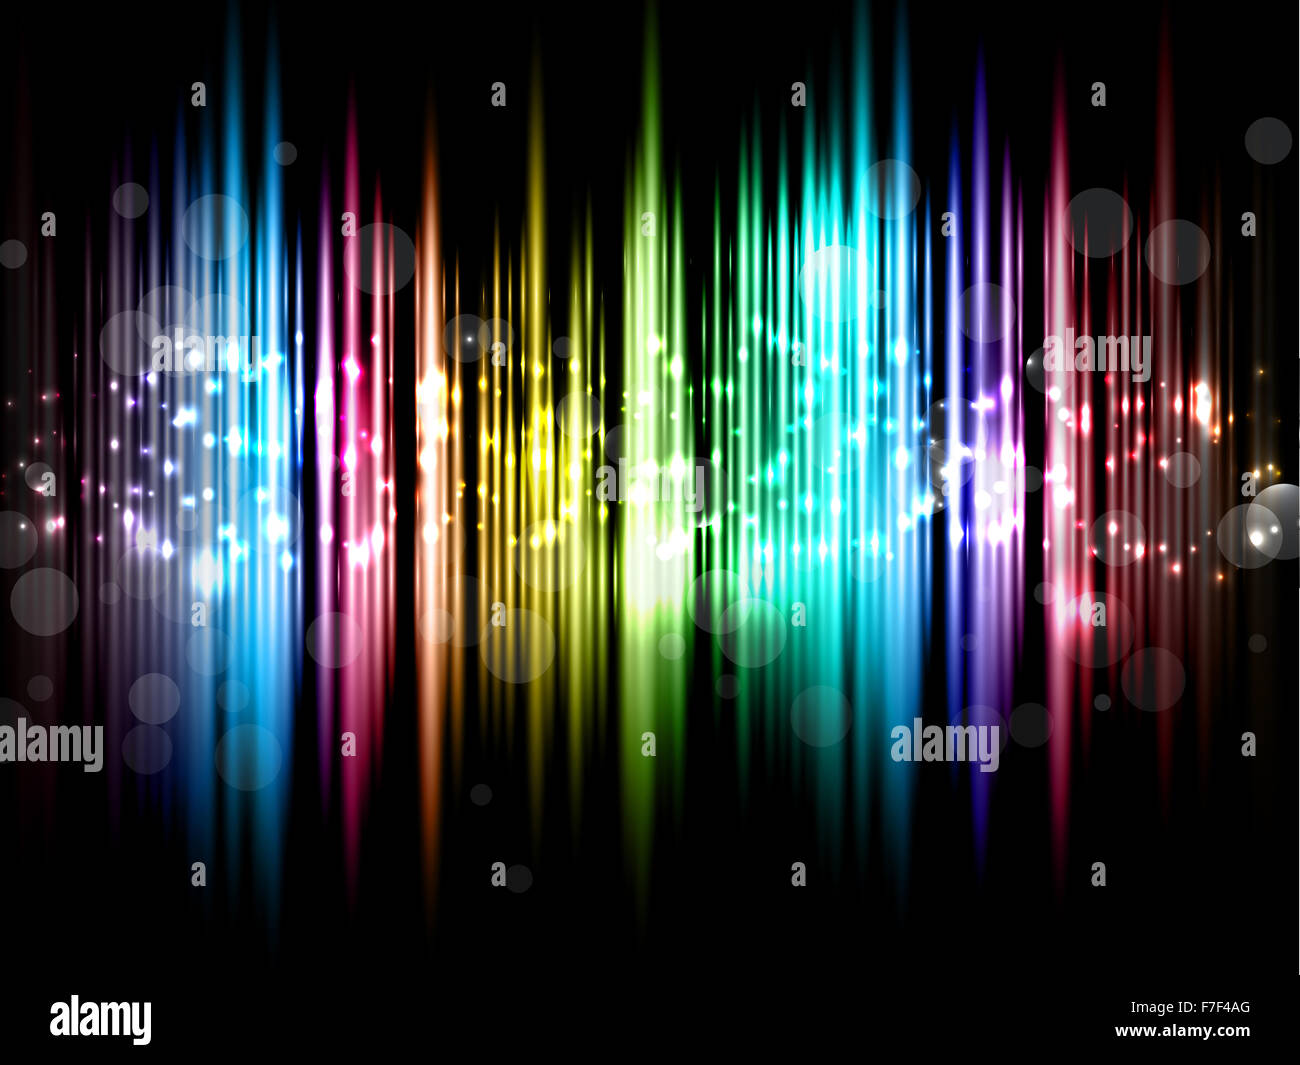 Abstract design background with sparkly lights Stock Photo